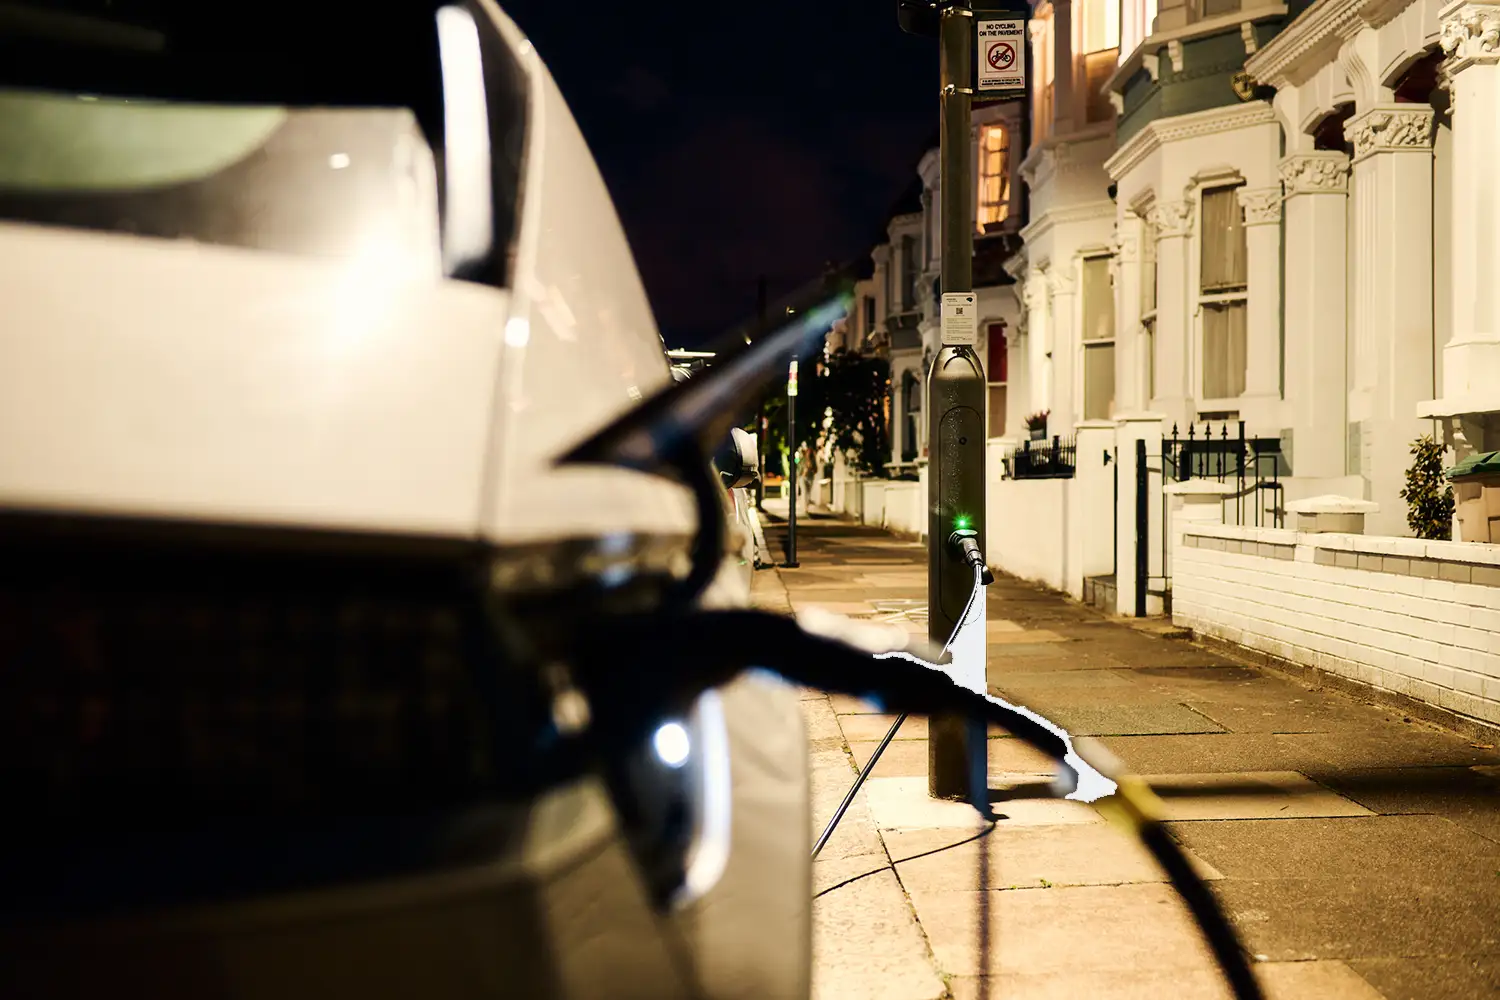 Middlesbrough Council selects ubitricity to deploy 160 on-street Electric Vehicle charge points